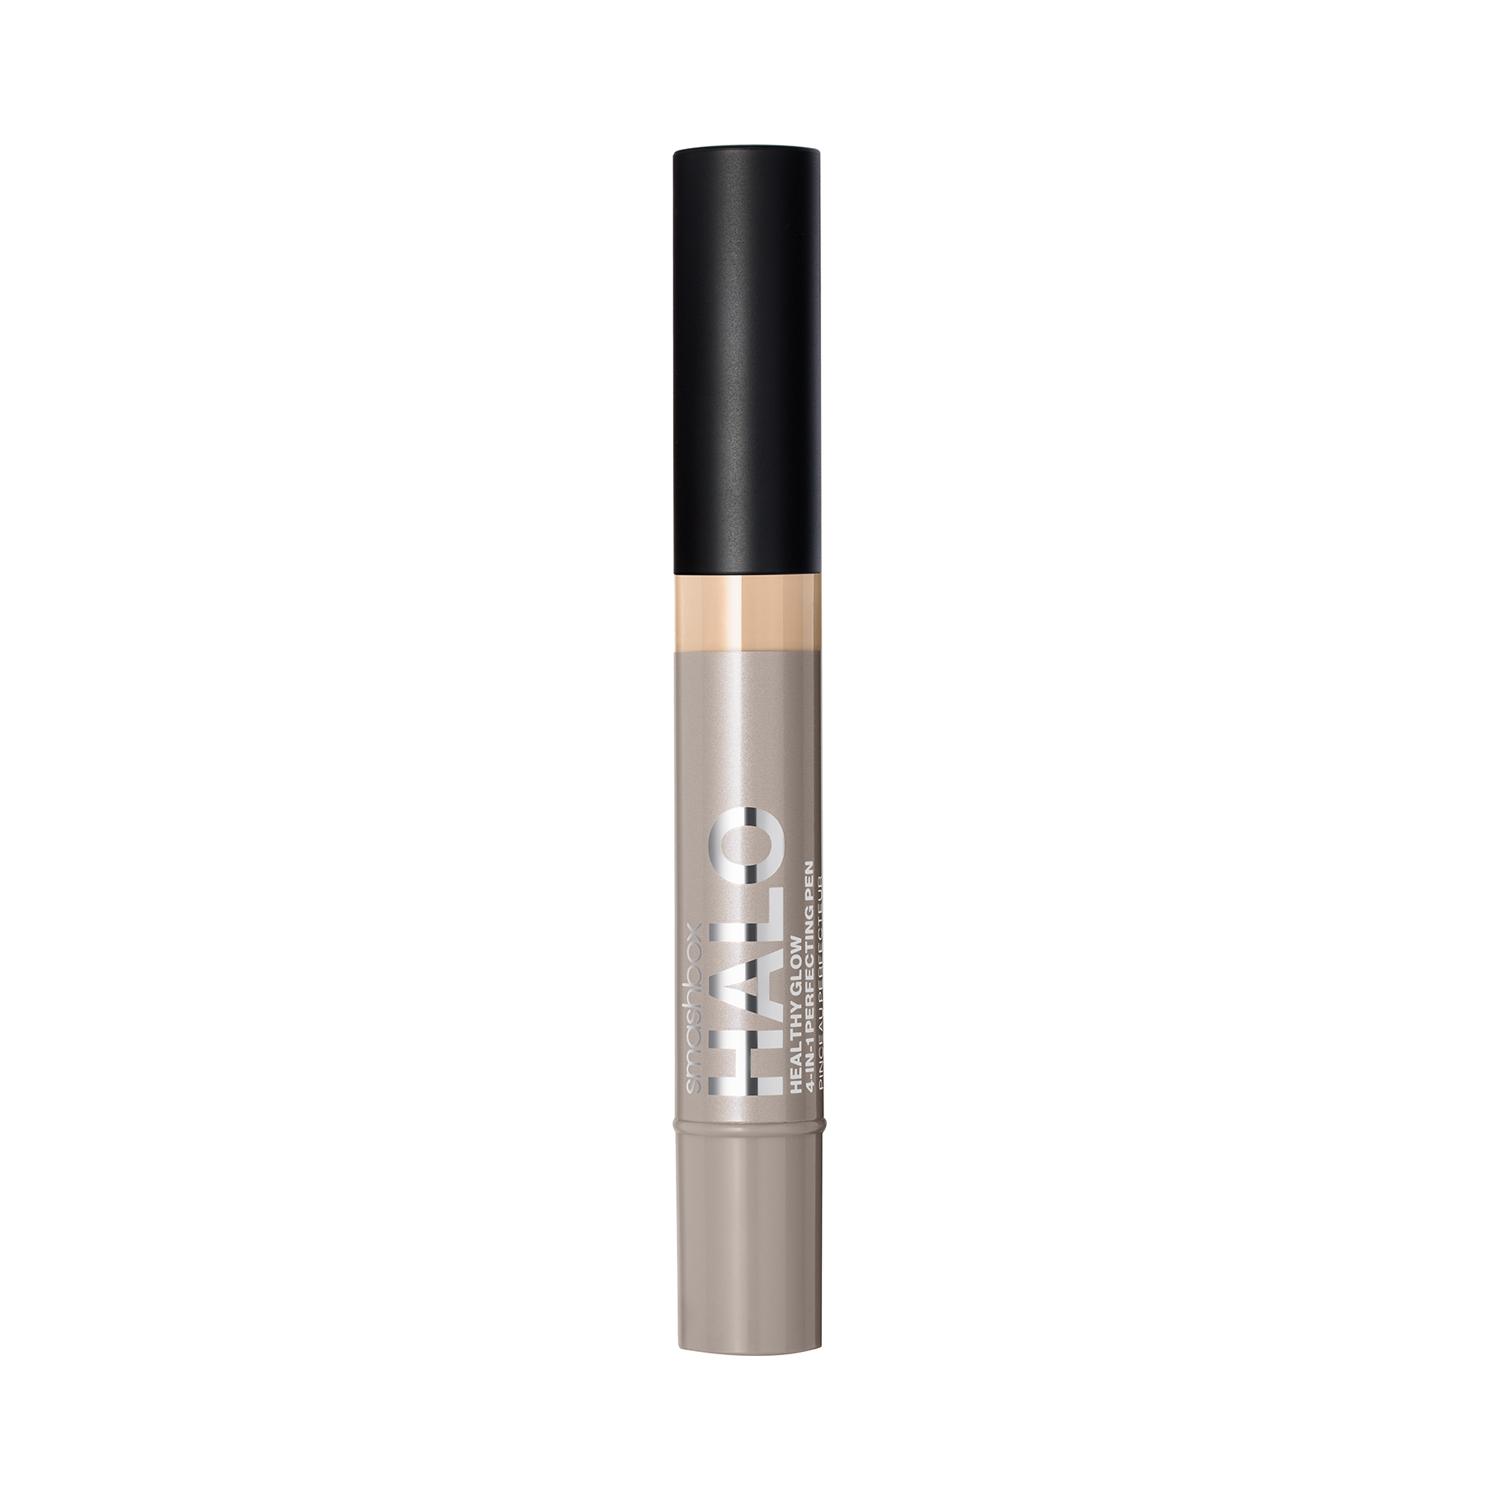 smashbox halo healthy glow 4-in-1 perfecting concealer pen - l10n (3.5ml)